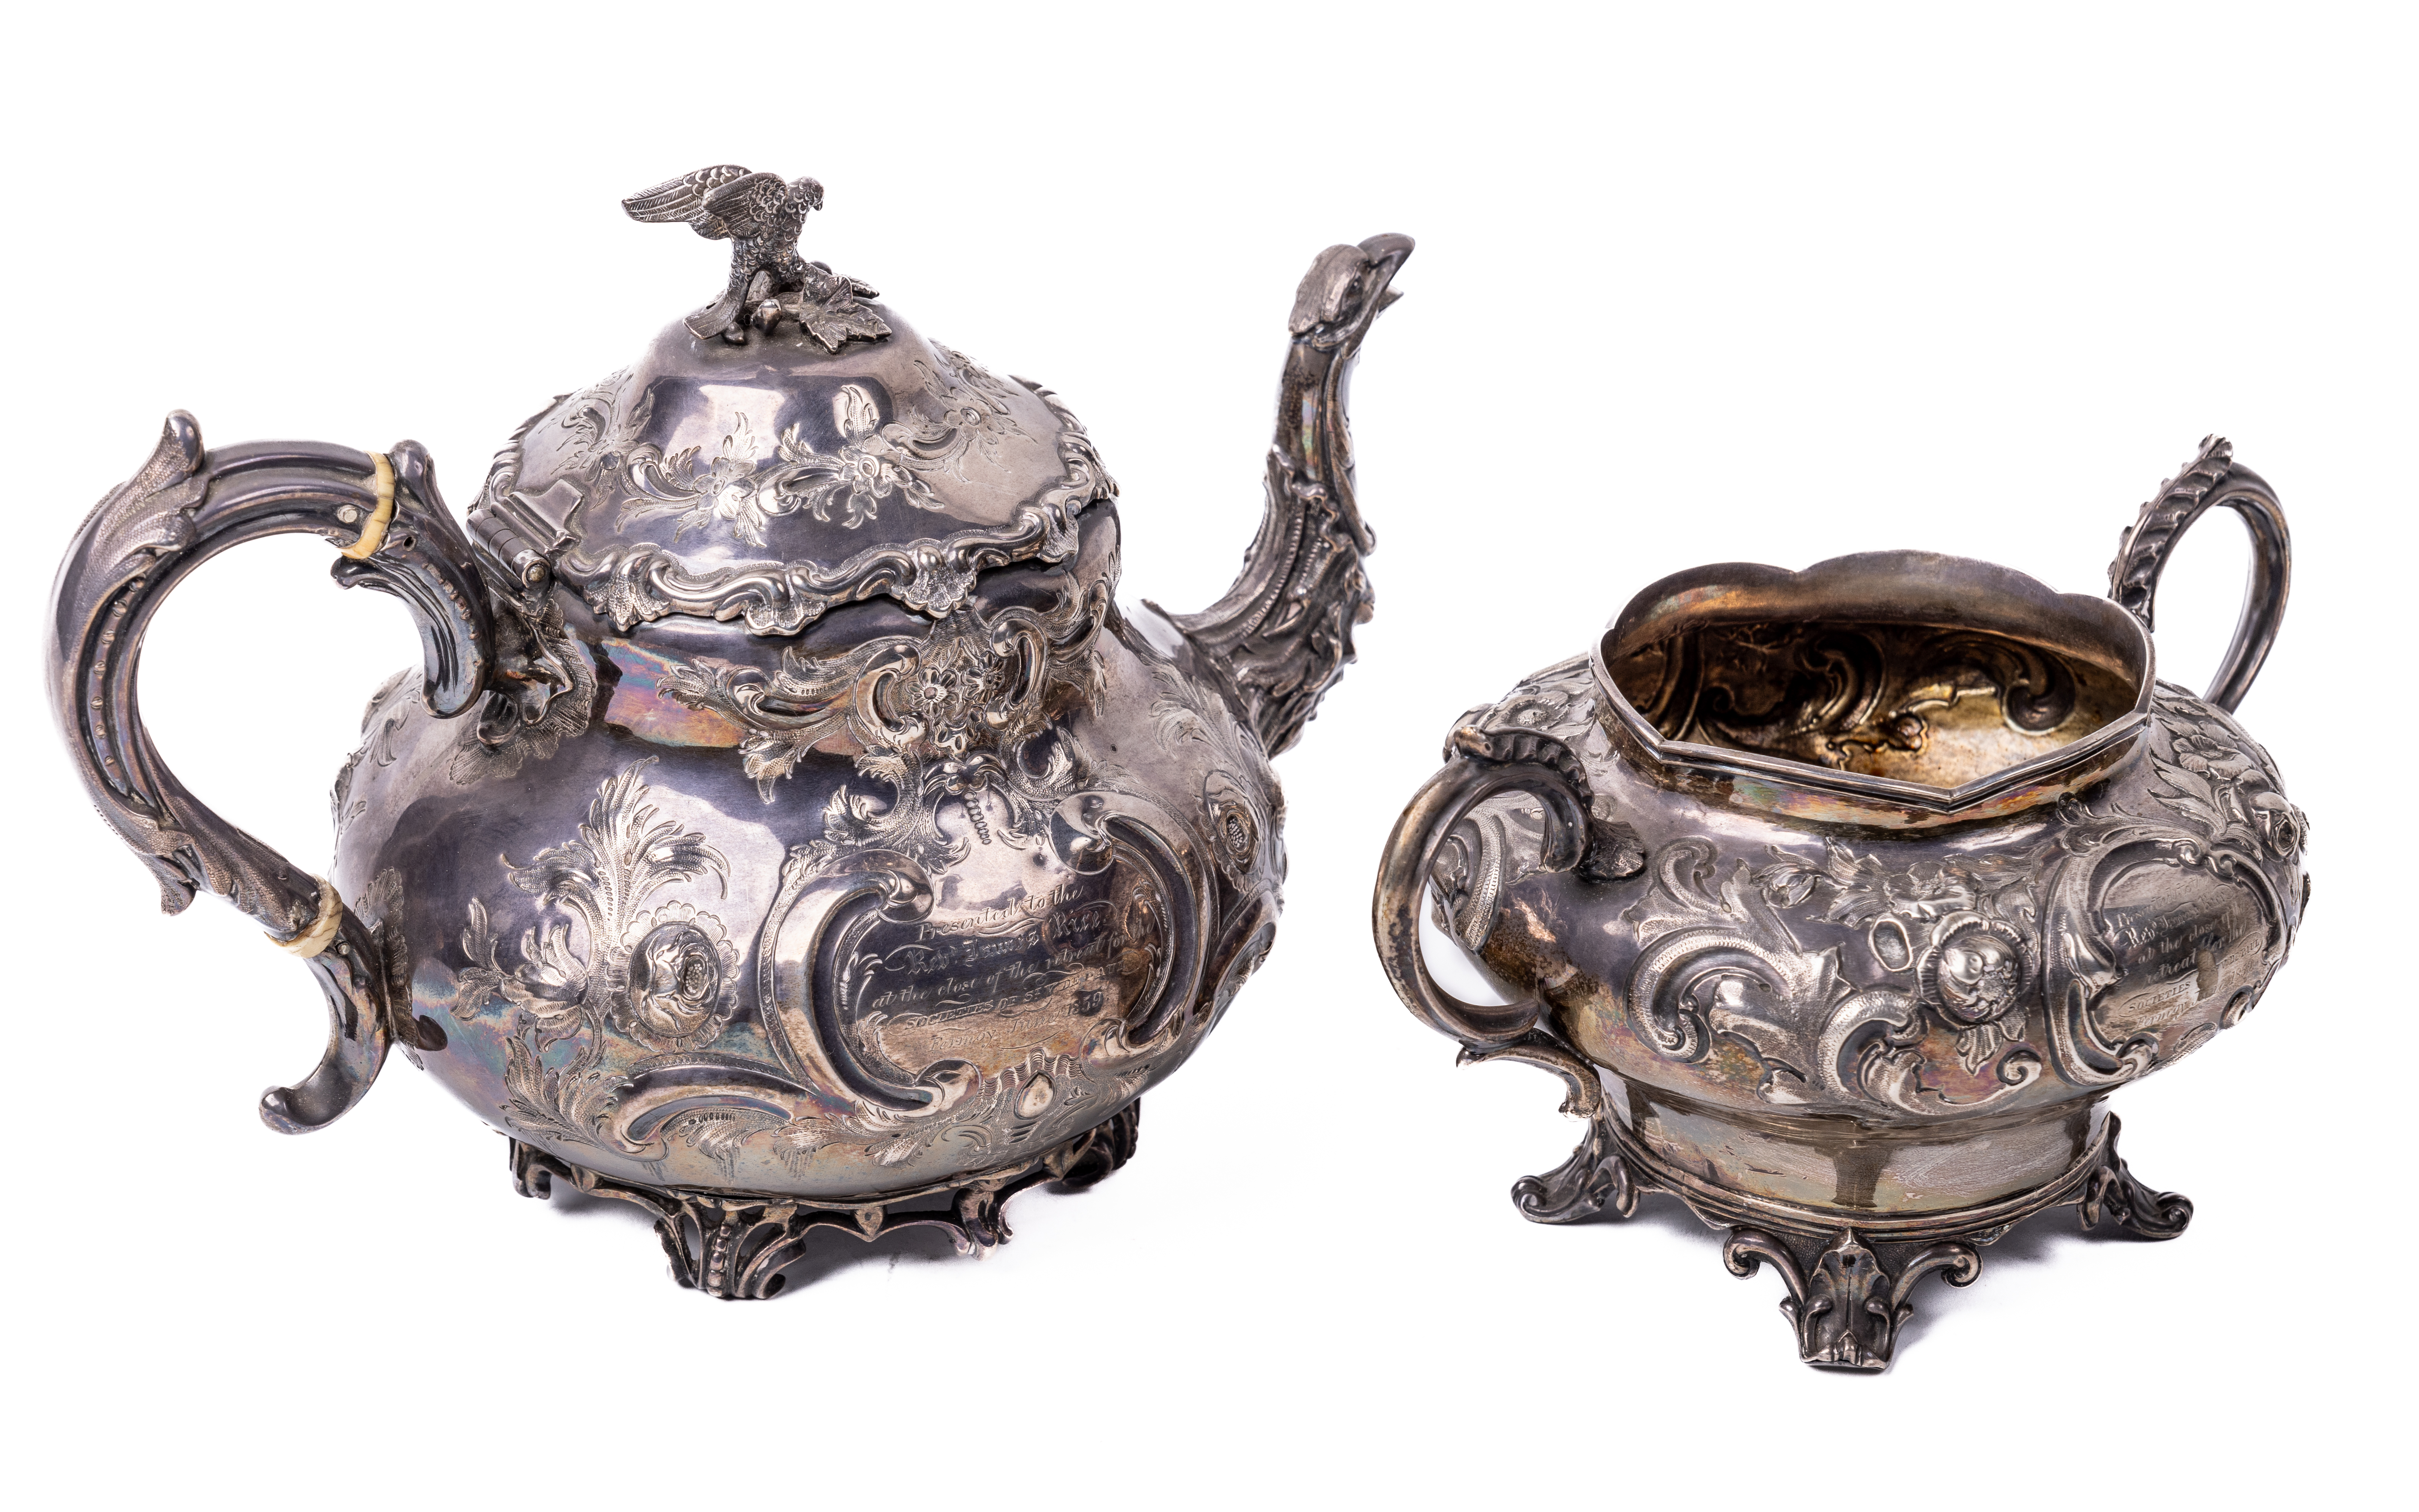 Co. Cork: A fine quality English silver two part Tea Service, embossed design comprising teapot